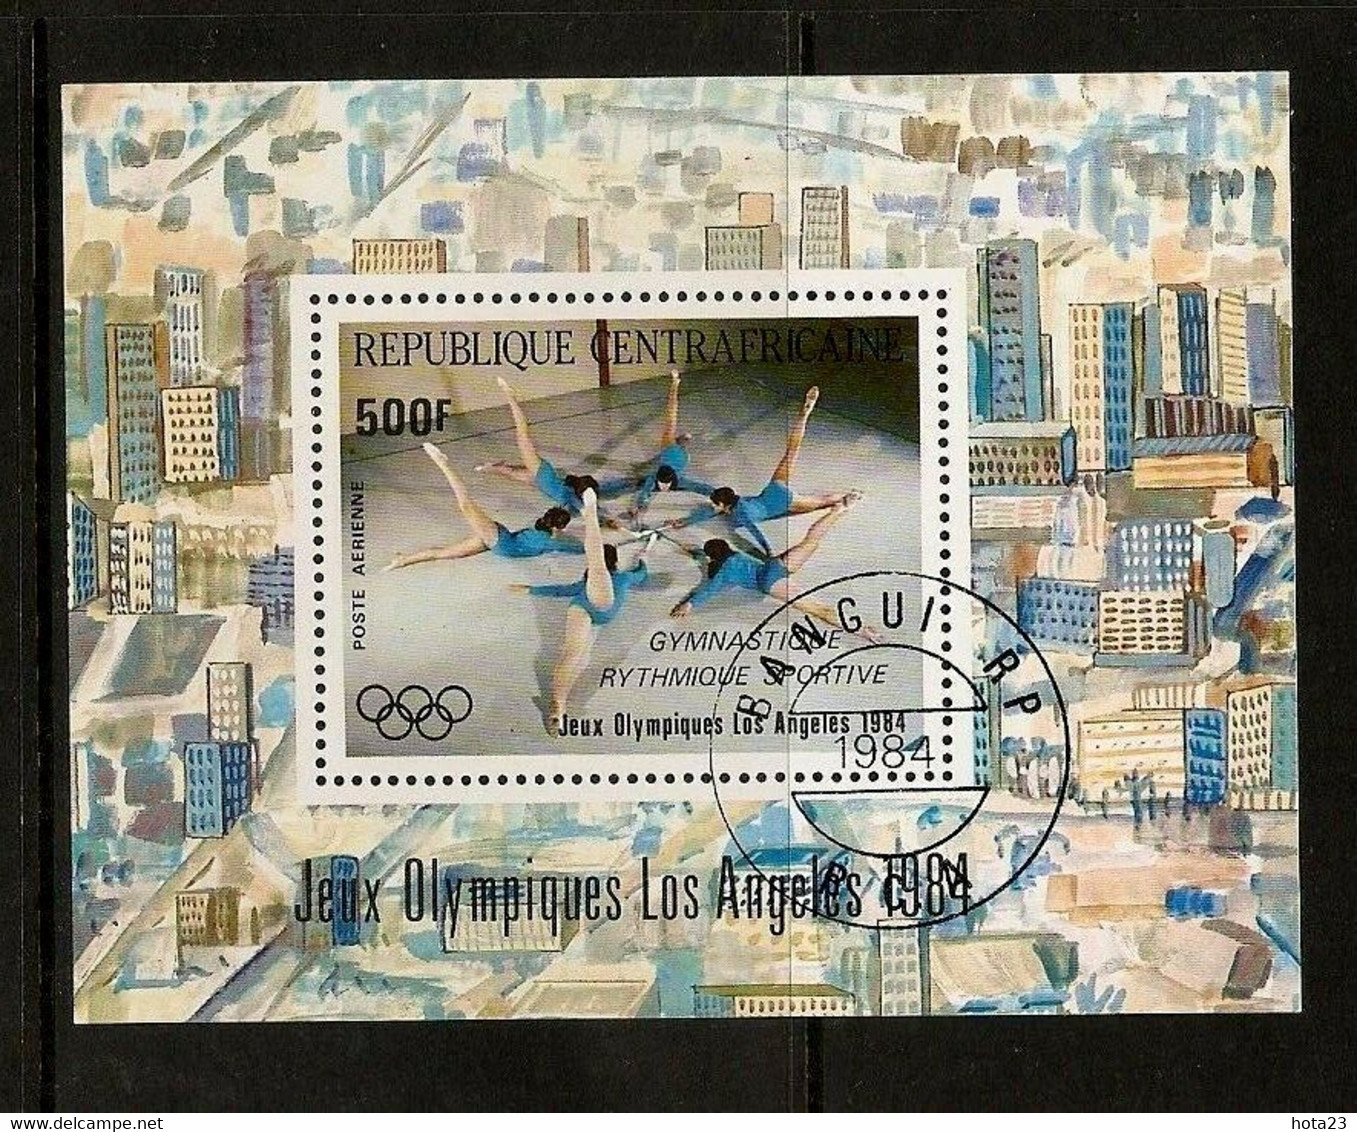 (!) Central African Republic.  Gymnastic SC # C302 Olympics 184 Los Angeles S / S Used / Cto - Ete 1984: Los Angeles